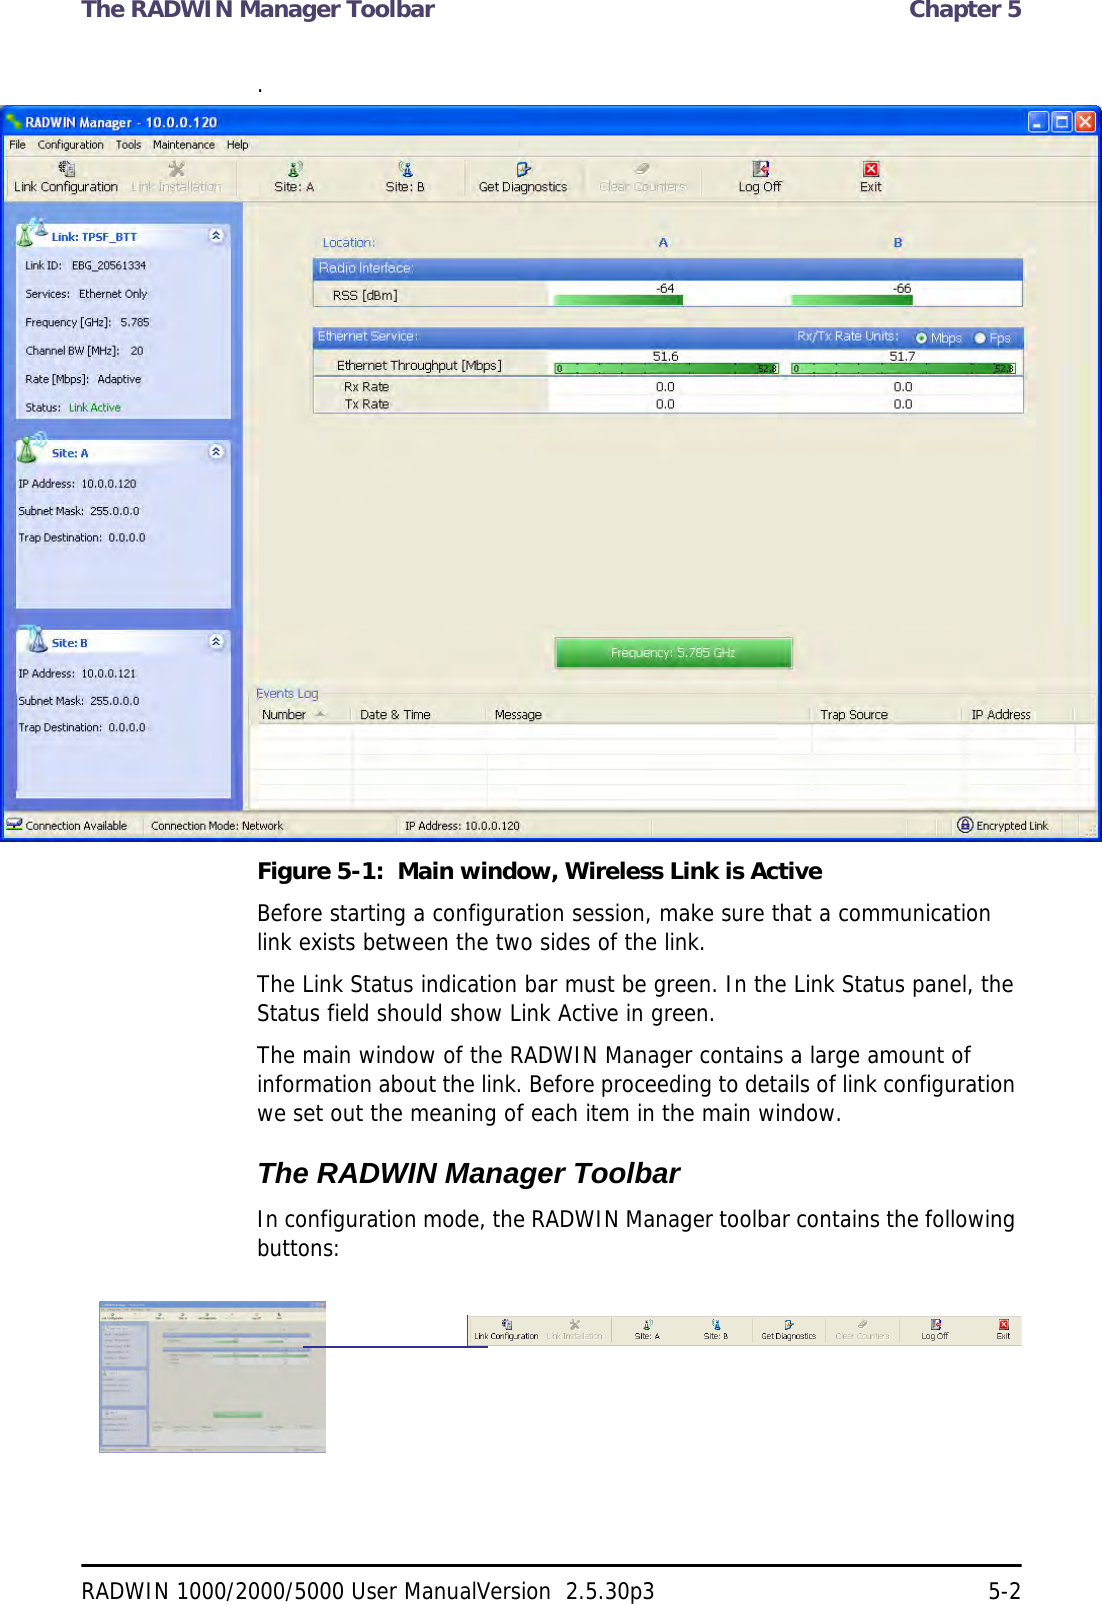 The RADWIN Manager Toolbar  Chapter 5RADWIN 1000/2000/5000 User ManualVersion  2.5.30p3 5-2.Figure 5-1:  Main window, Wireless Link is ActiveBefore starting a configuration session, make sure that a communication link exists between the two sides of the link.The Link Status indication bar must be green. In the Link Status panel, the Status field should show Link Active in green.The main window of the RADWIN Manager contains a large amount of information about the link. Before proceeding to details of link configuration we set out the meaning of each item in the main window.The RADWIN Manager ToolbarIn configuration mode, the RADWIN Manager toolbar contains the following buttons: